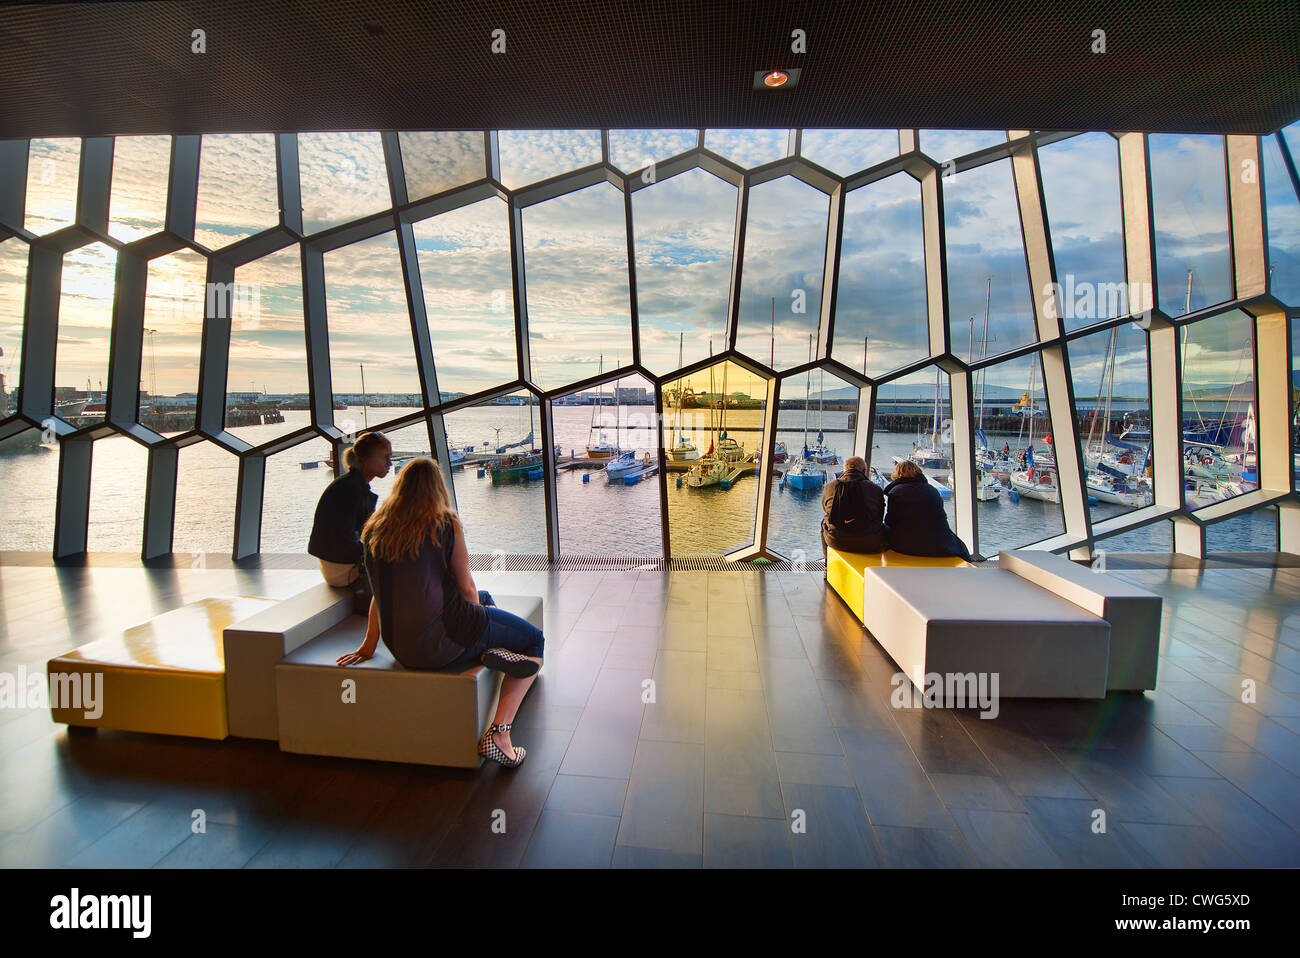 Looking out over the harbour from the Harpa Concert & Conference Center, Reykjavík, Iceland Stock Photo